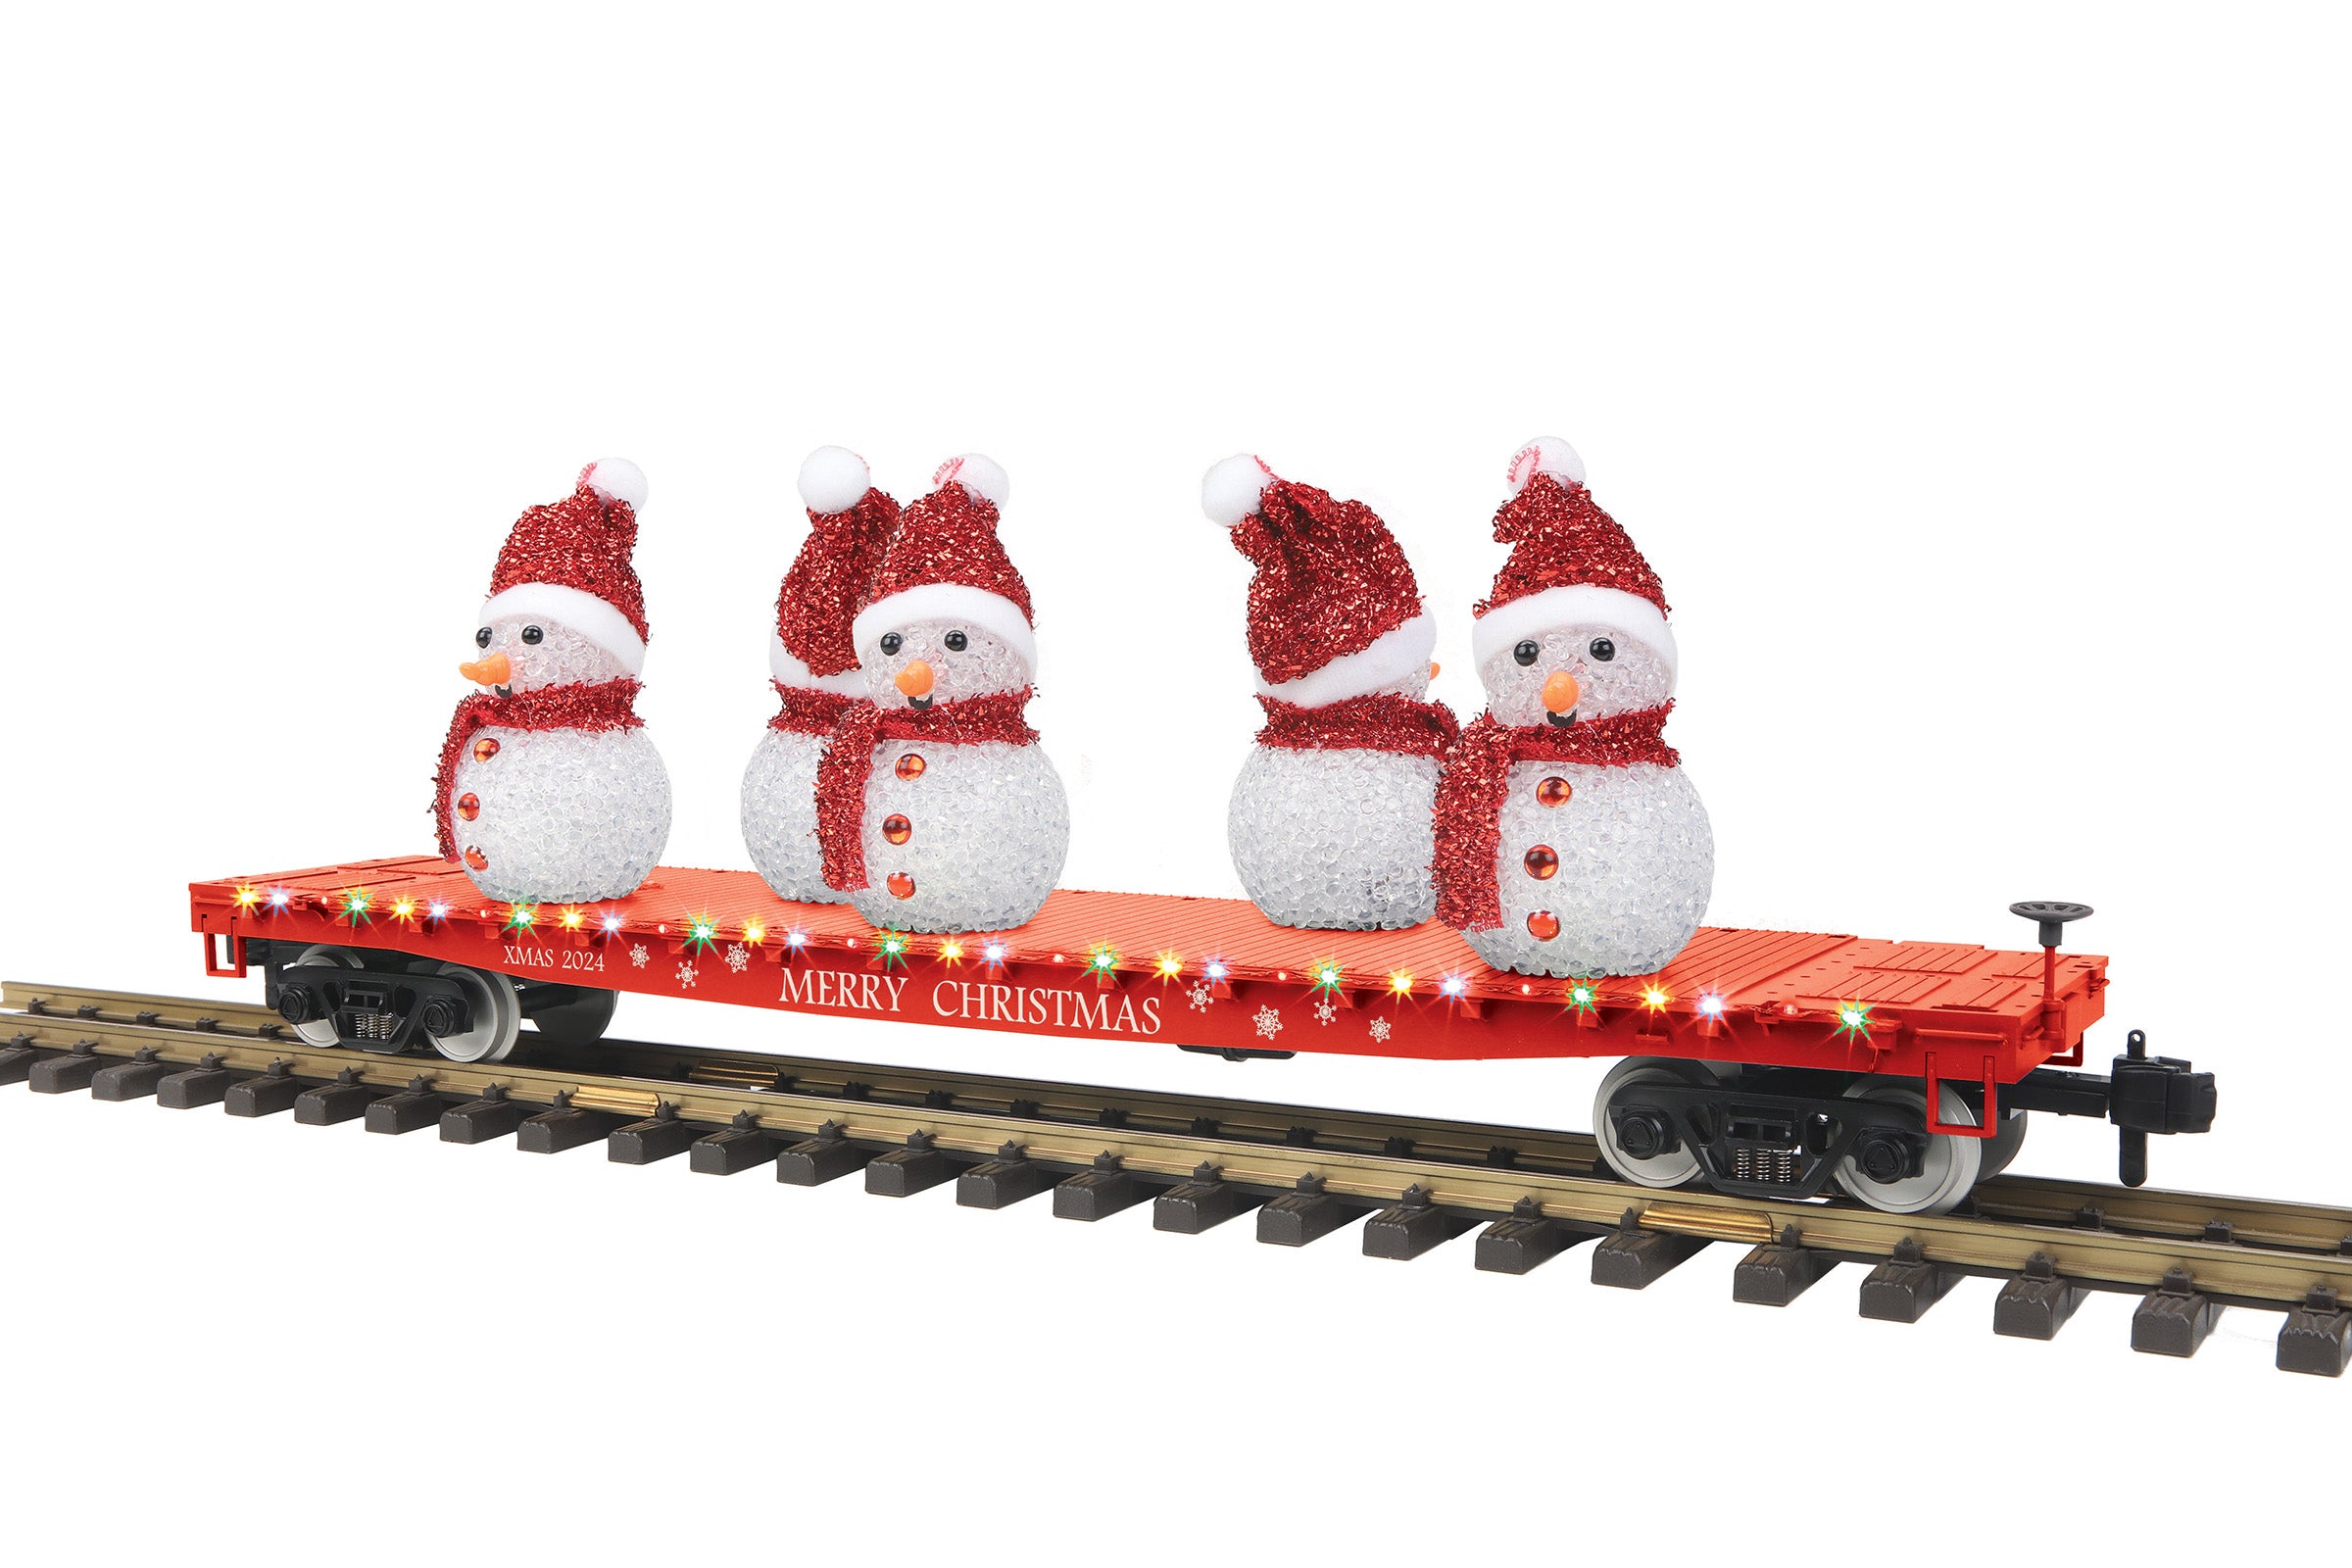 MTH 70-76069 - Flat Car "Christmas" #2024 w/ Lighted Snowmen (Red)